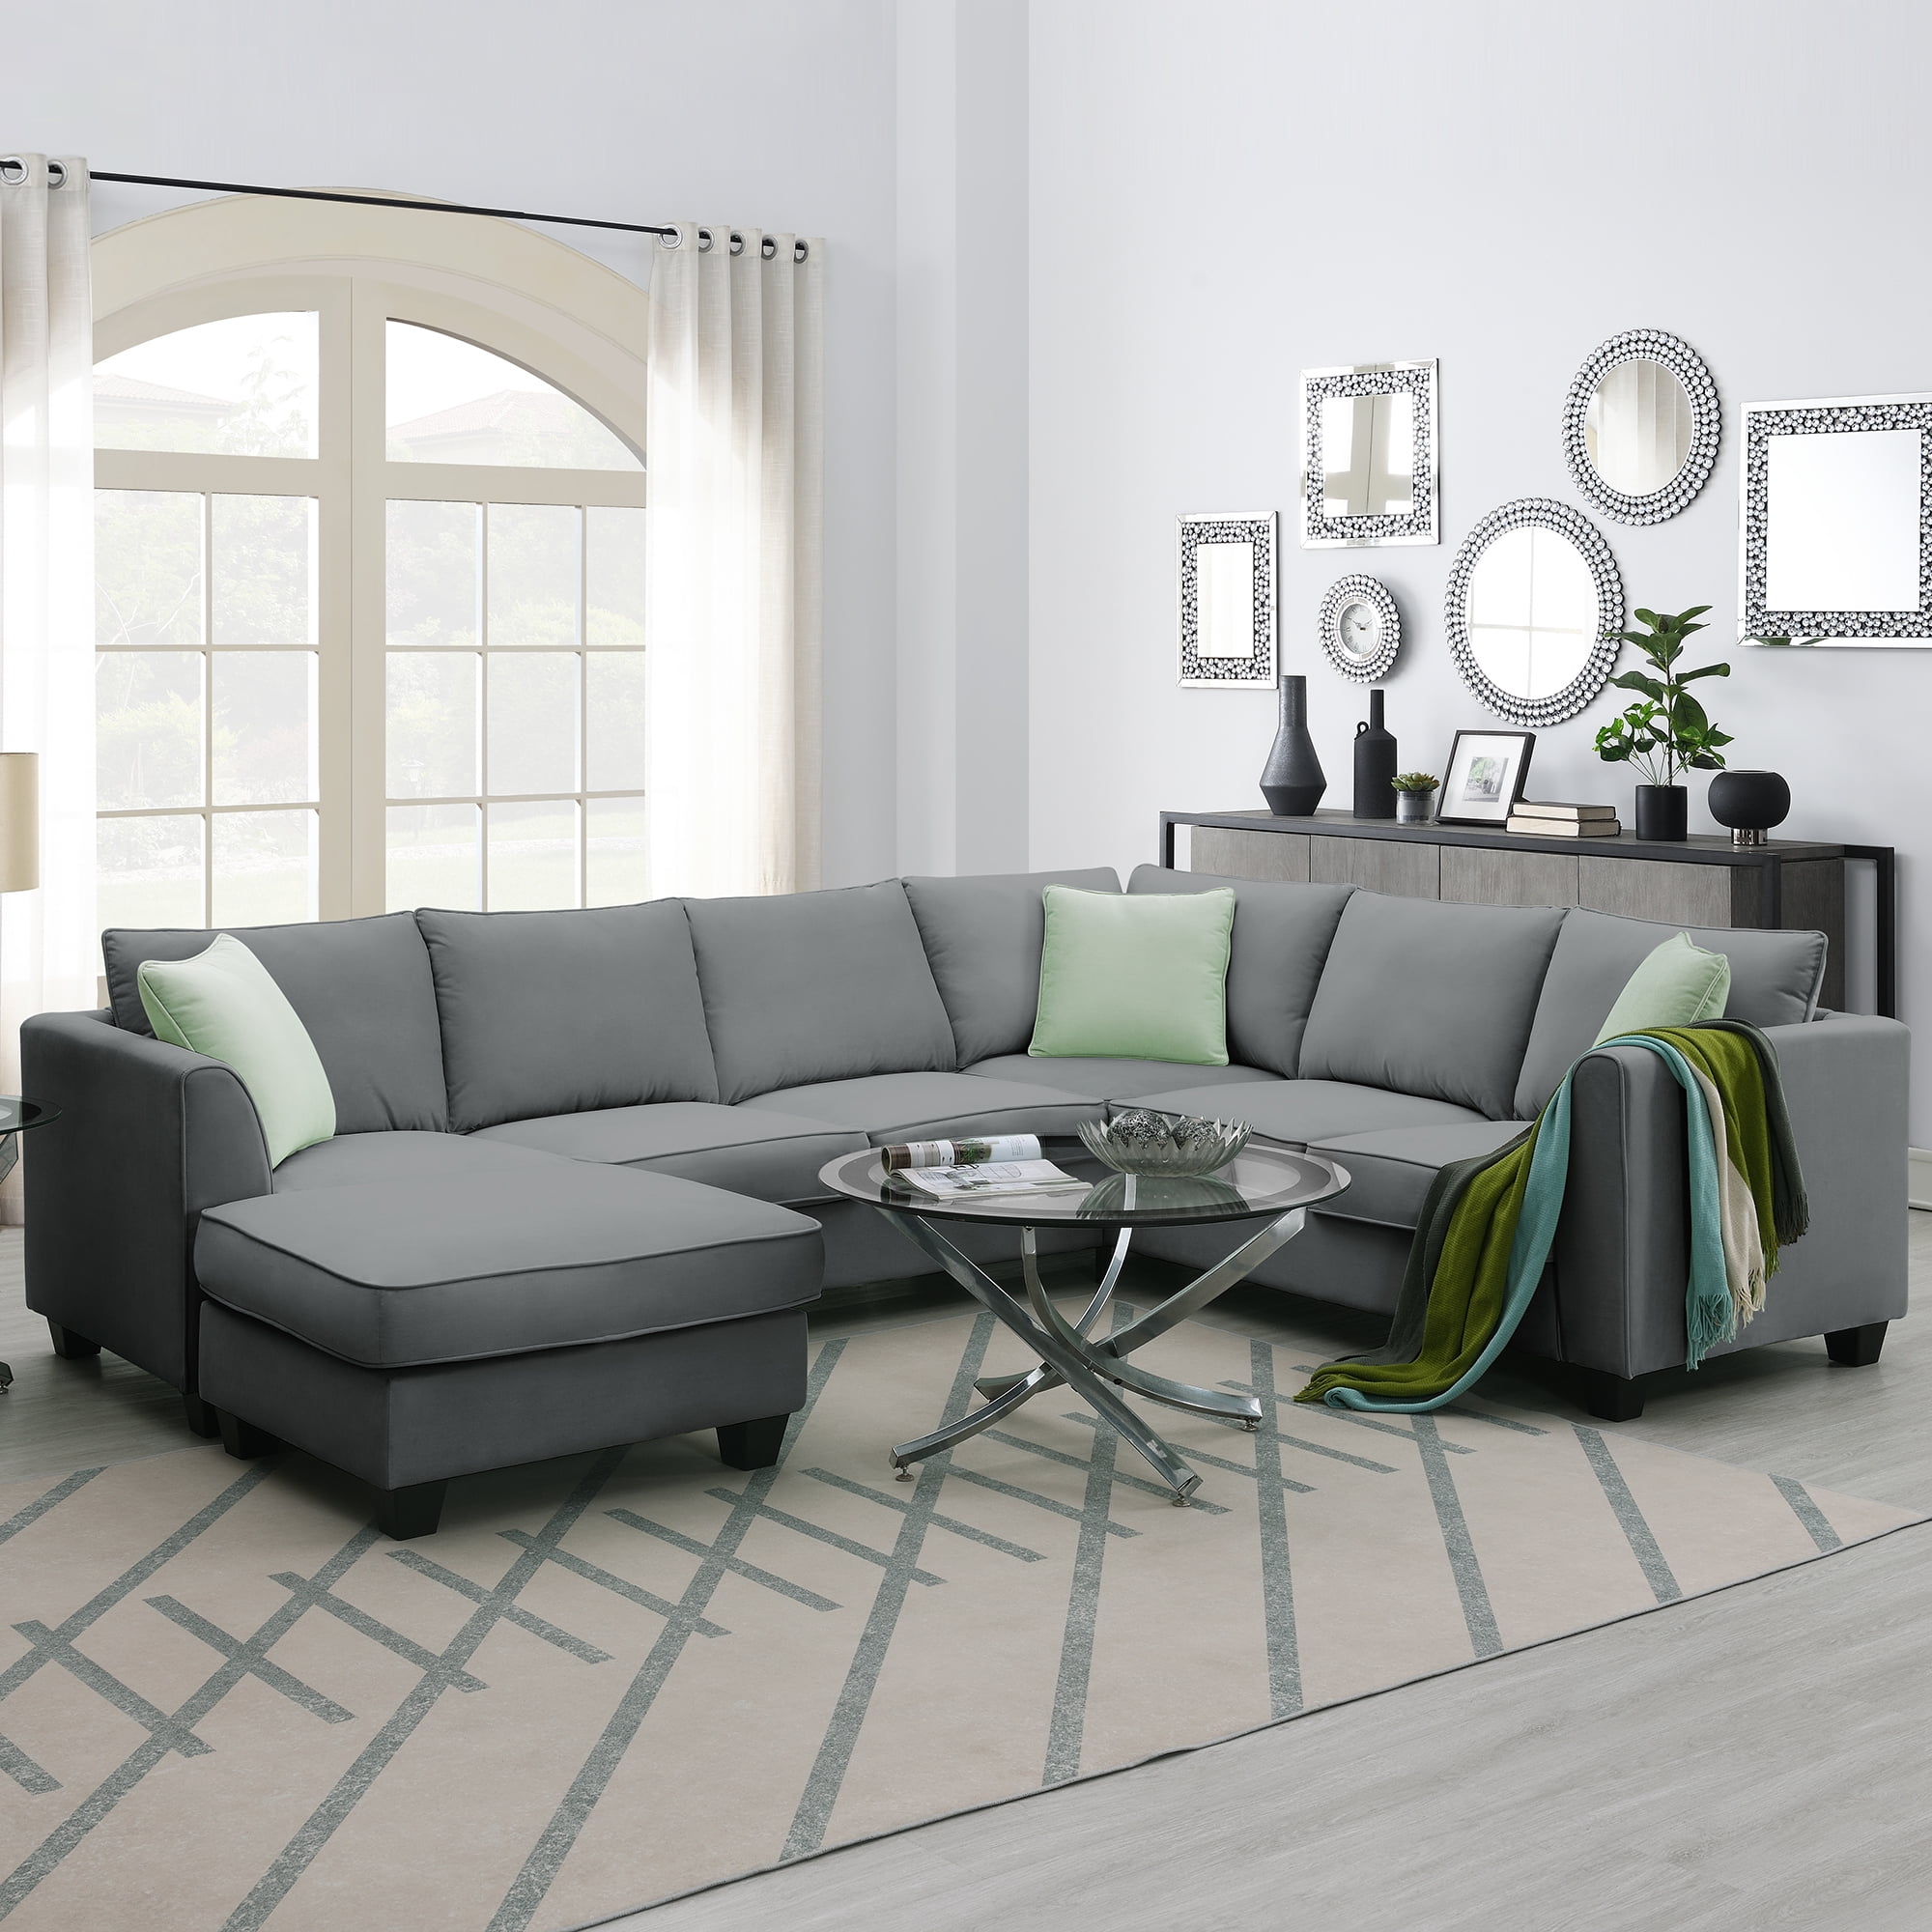 7 Seater Sectional Couch With Ottoman